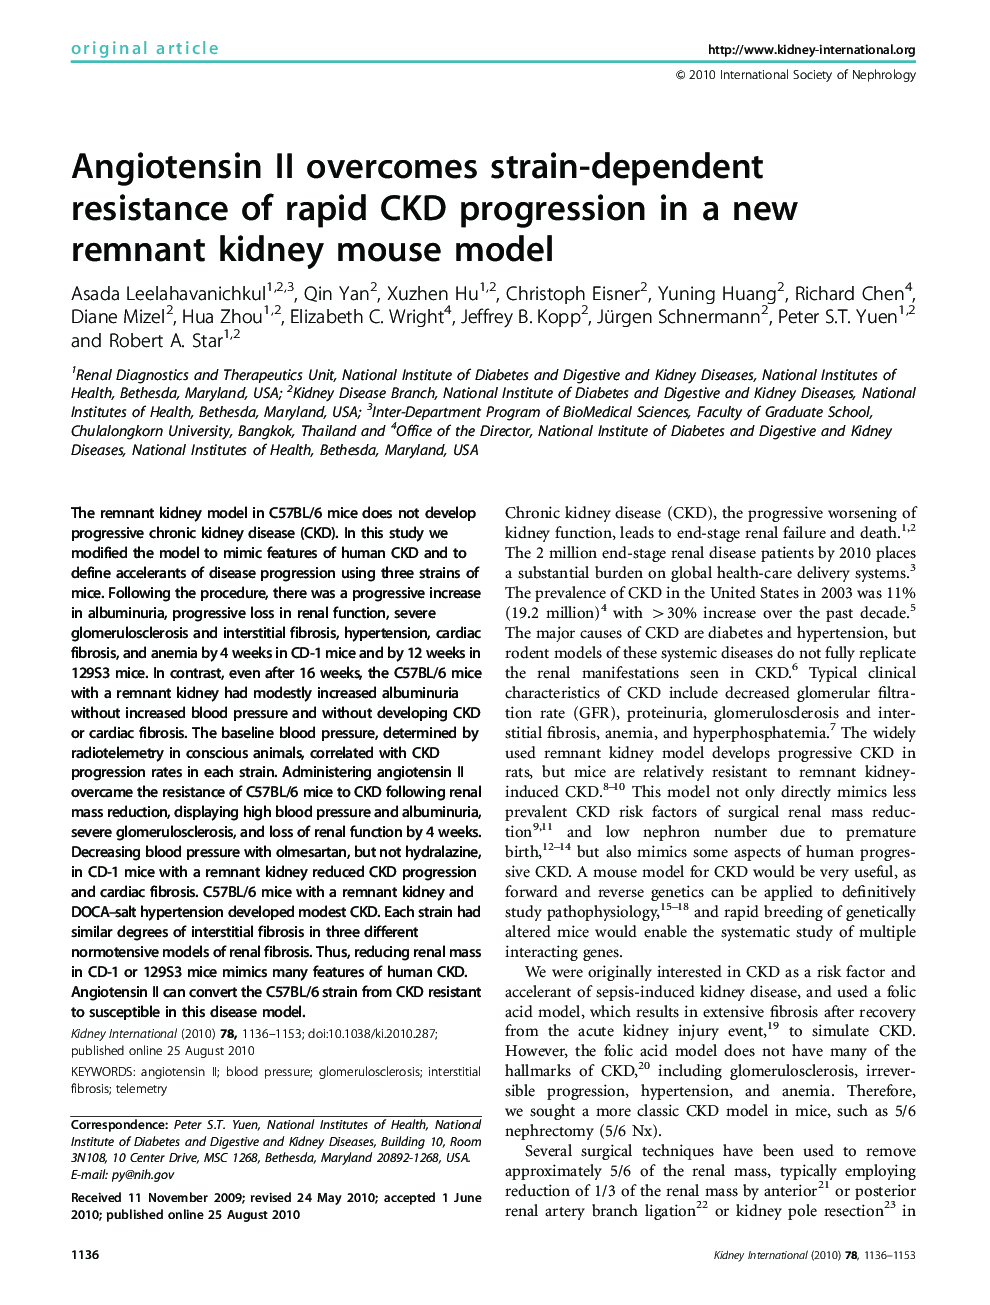 Angiotensin II overcomes strain-dependent resistance of rapid CKD progression in a new remnant kidney mouse model 